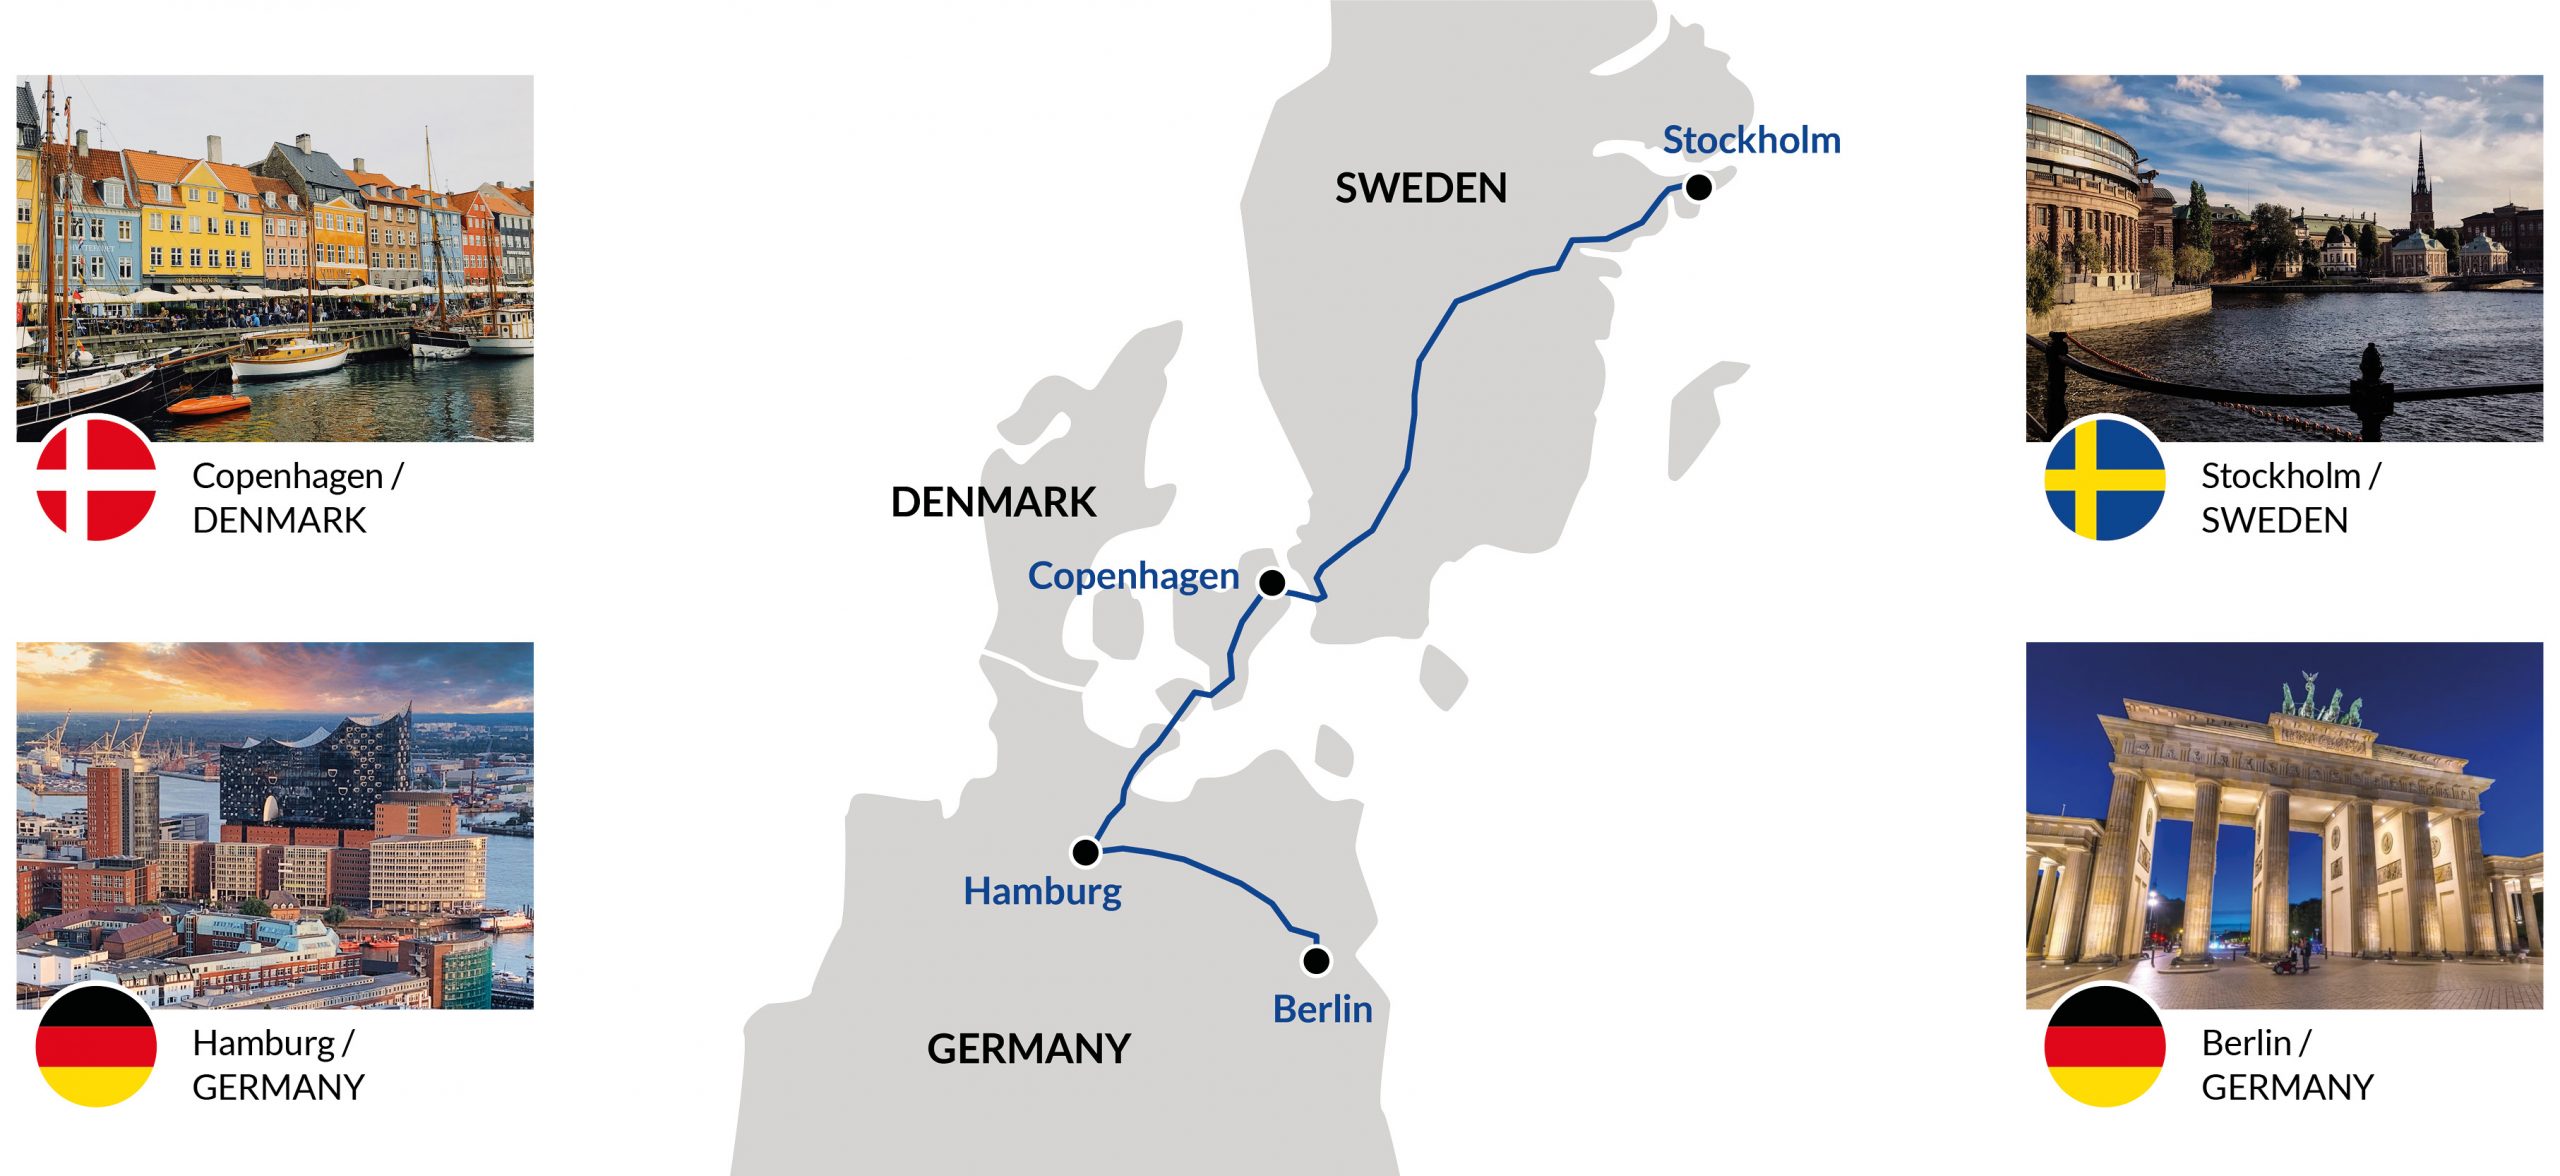 Roadshow_Map_routing_Northern_Europe